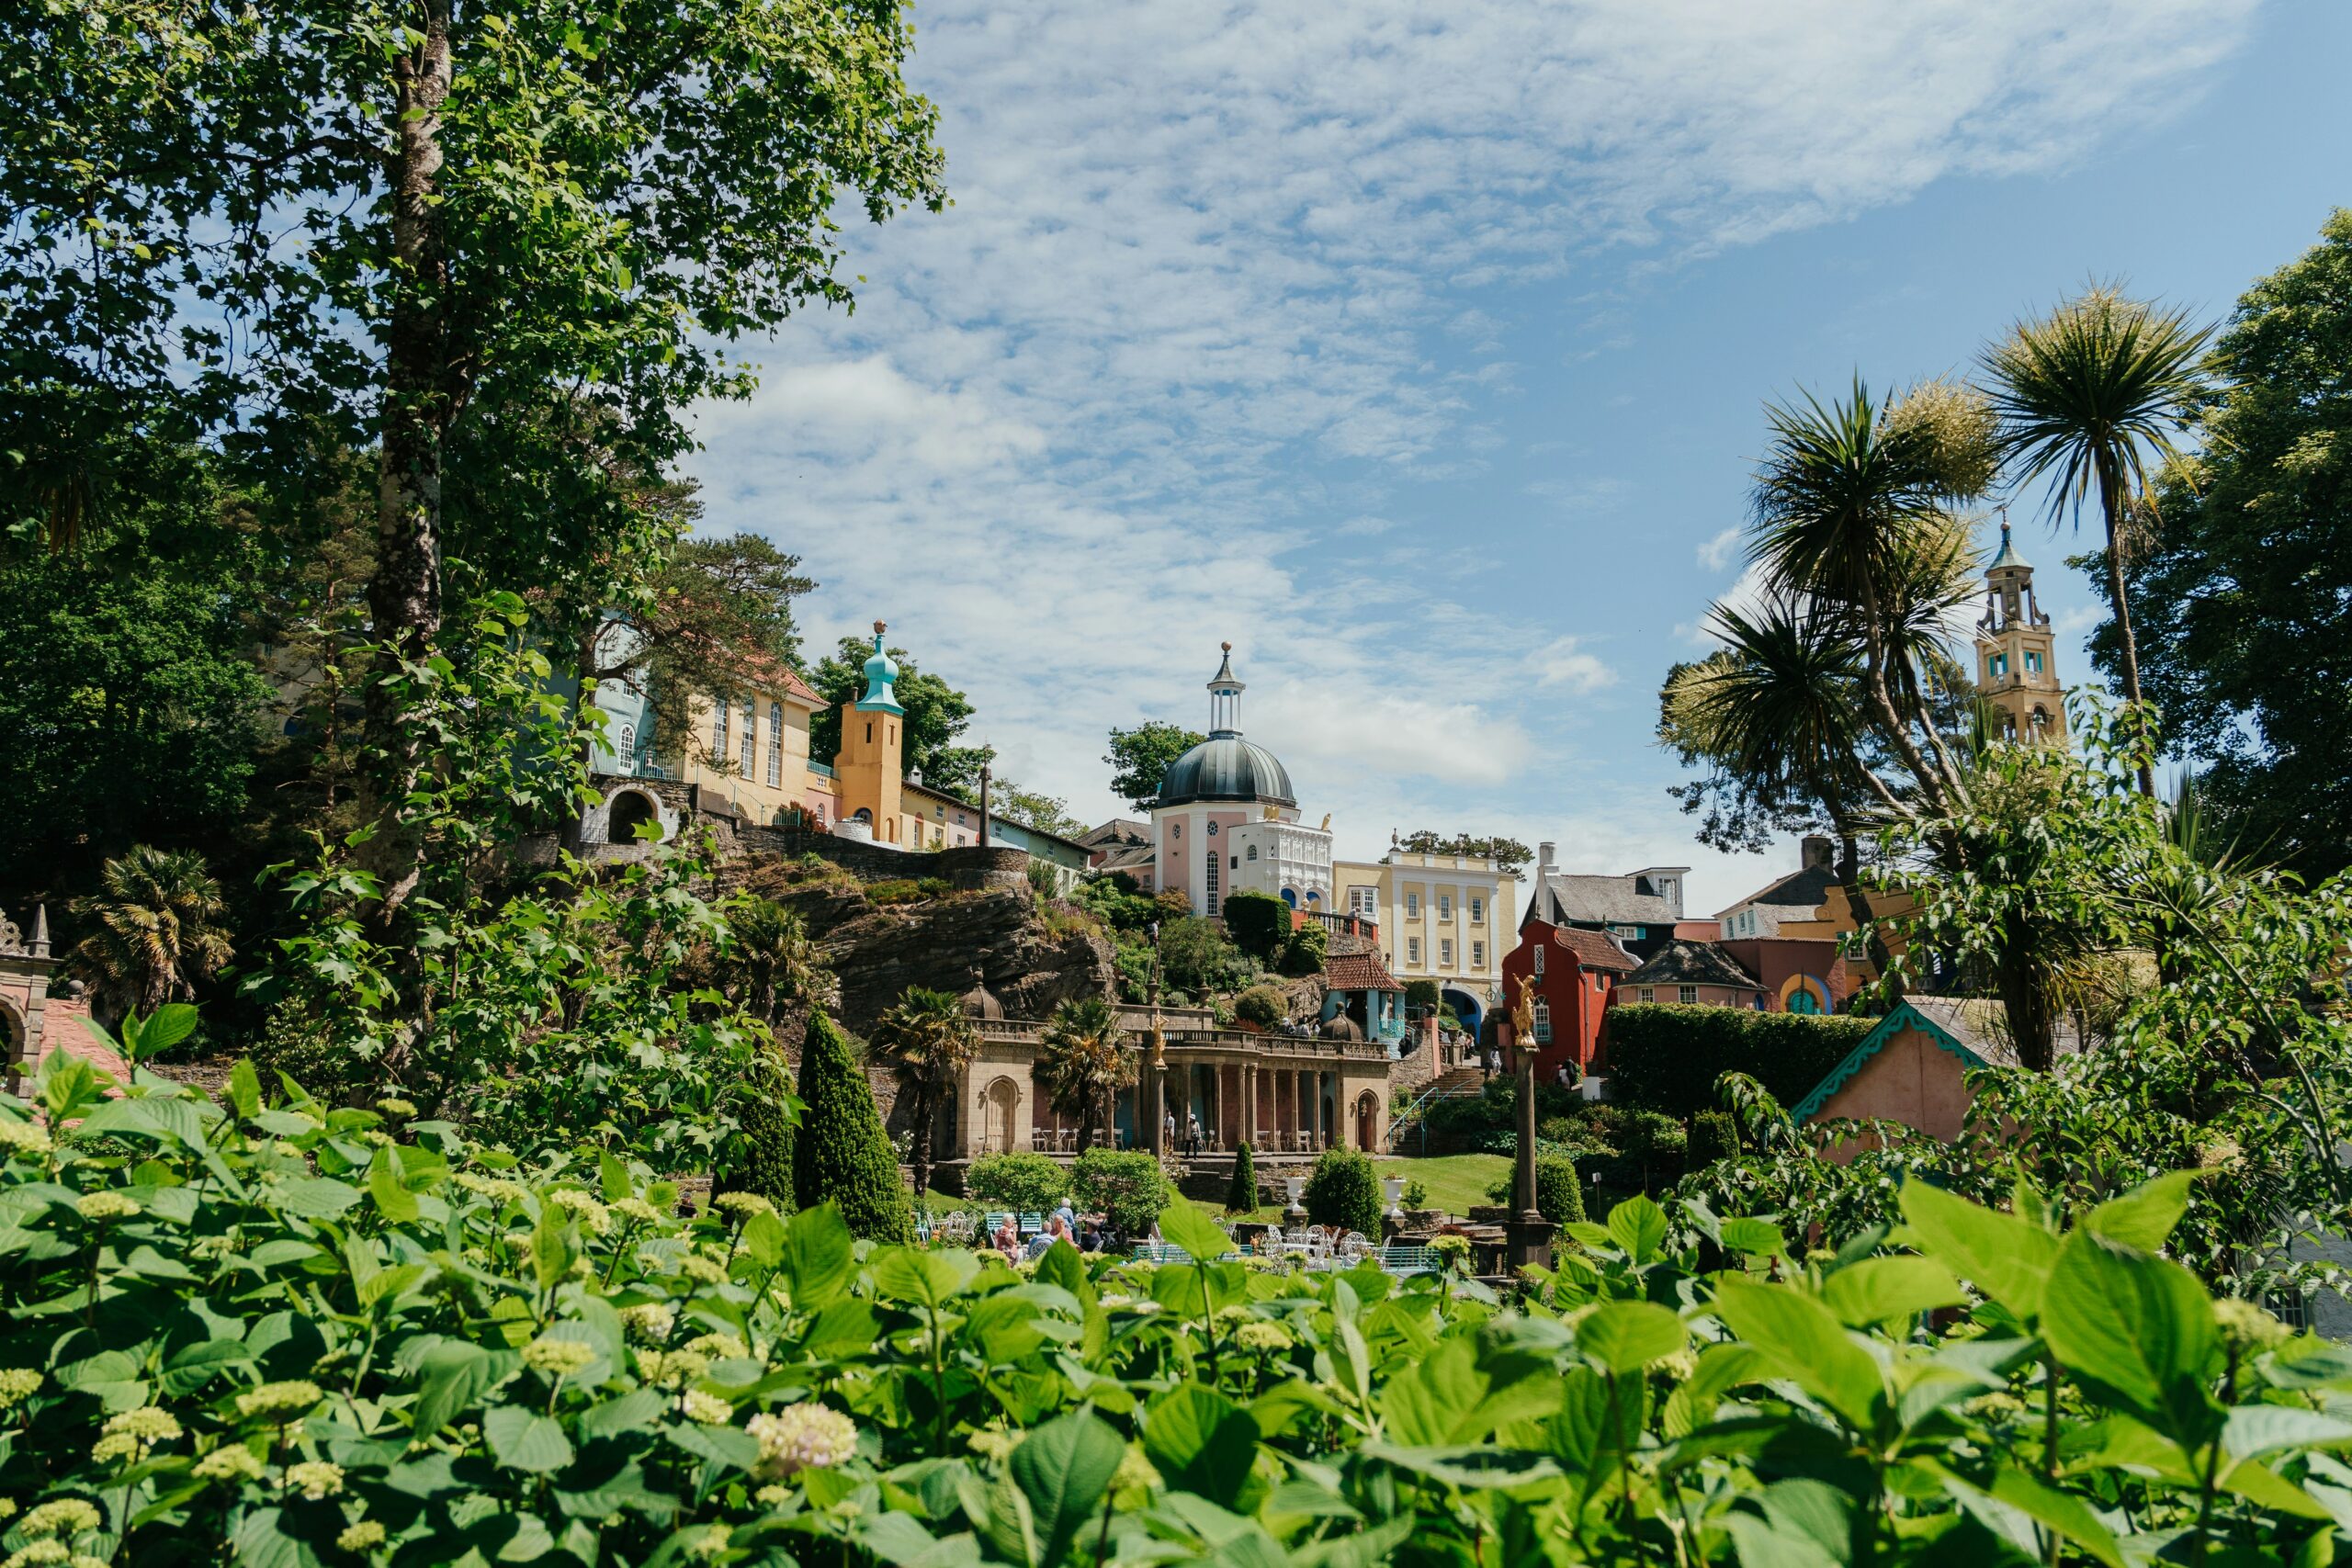 Portmeirion village in North Wales has been named one of the most beautiful places in the UK. Credit: Unsplash @shawnaggg